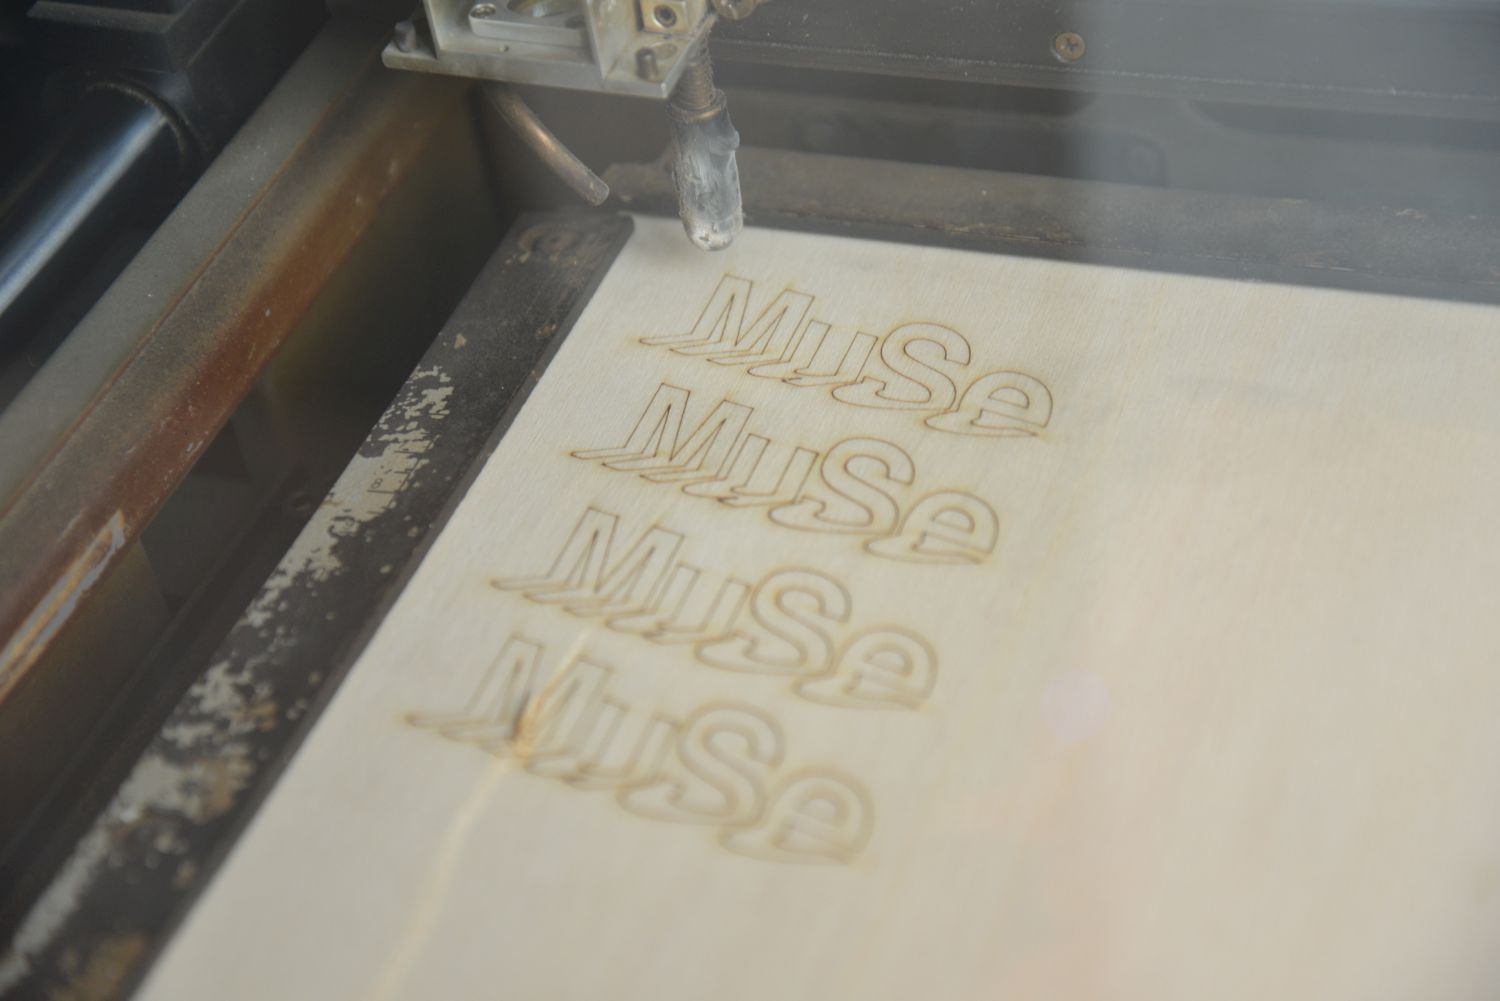 A laser cutter repeatedly engraves the museum's logo onto a piece of wooden board.